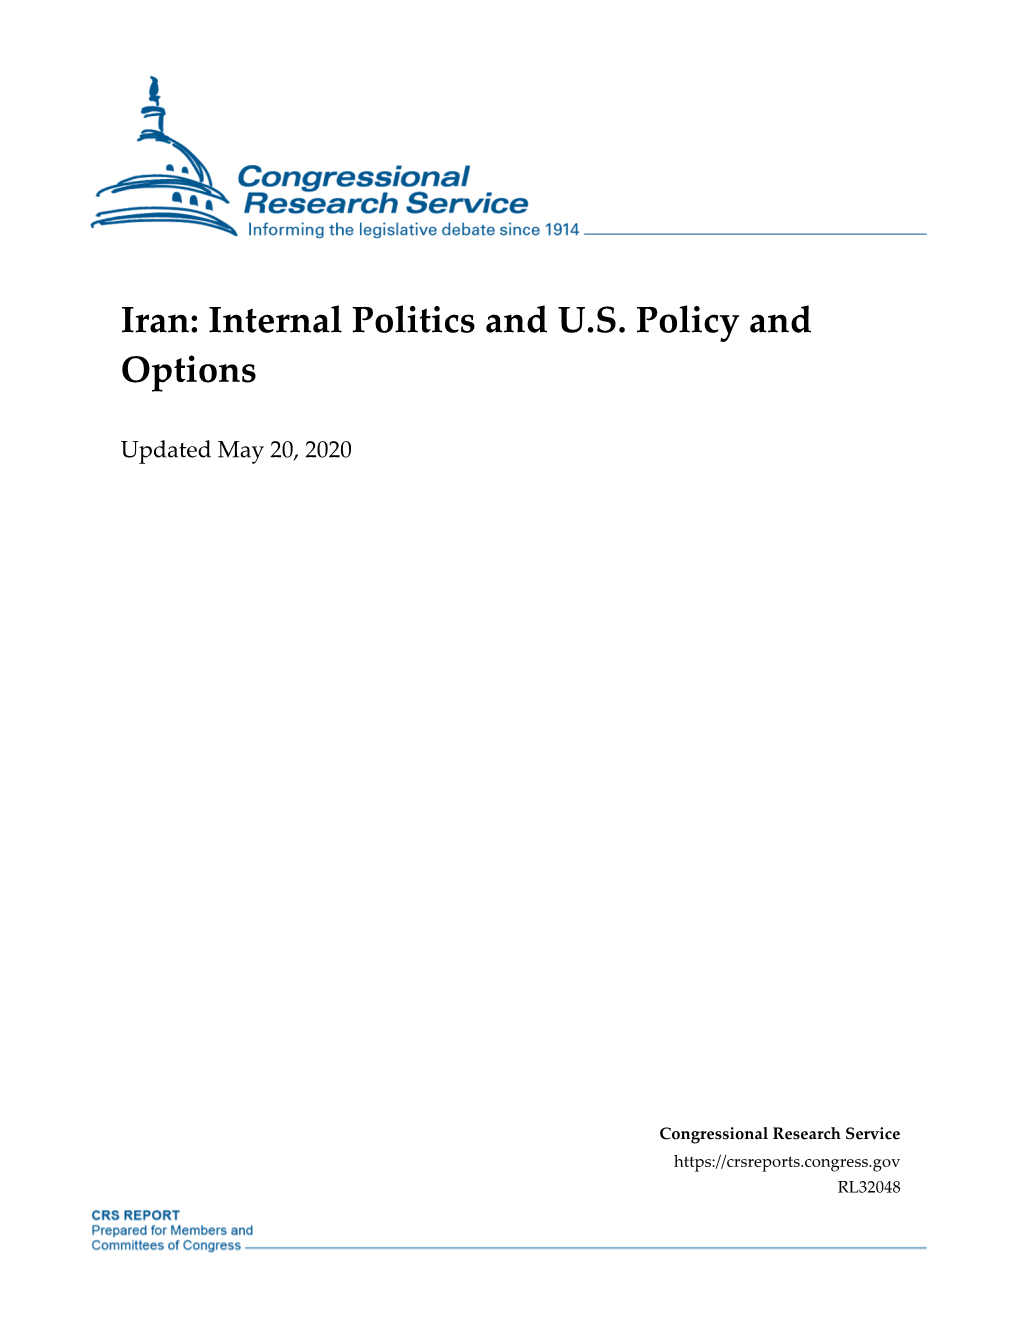 Iran: Internal Politics and US Policy and Options